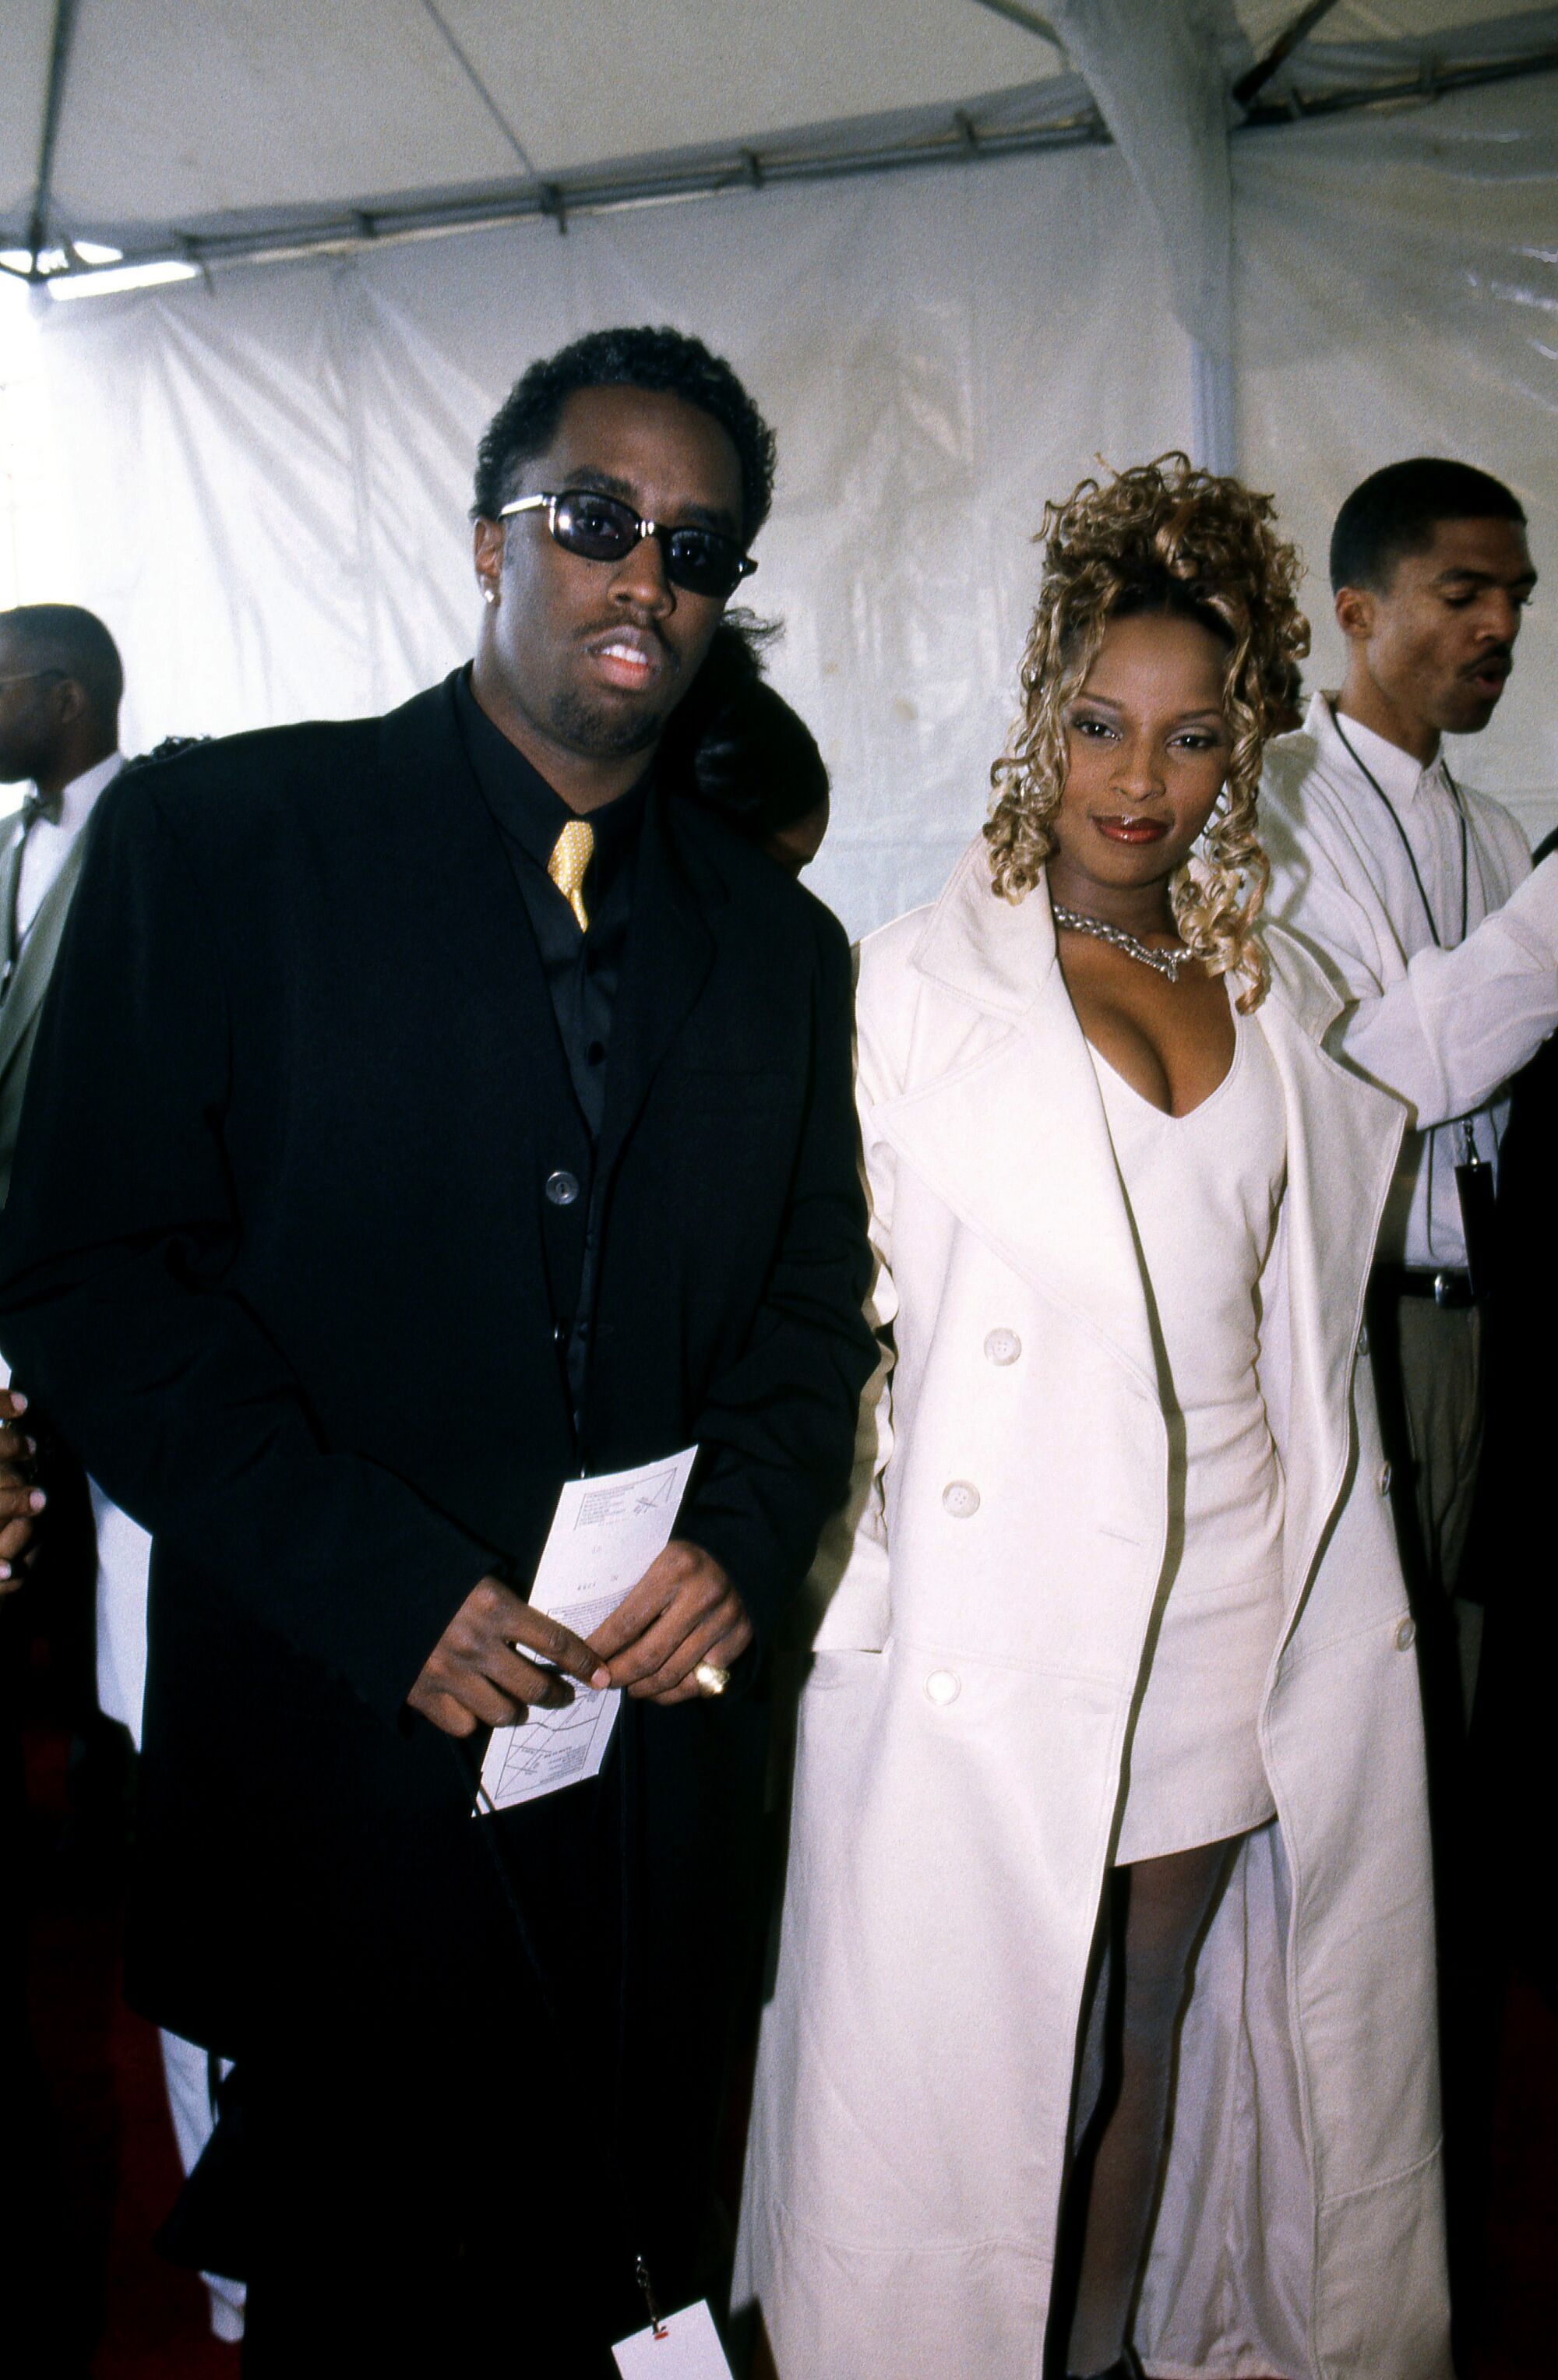 A man dressed in black walks next to a woman dressed in white.